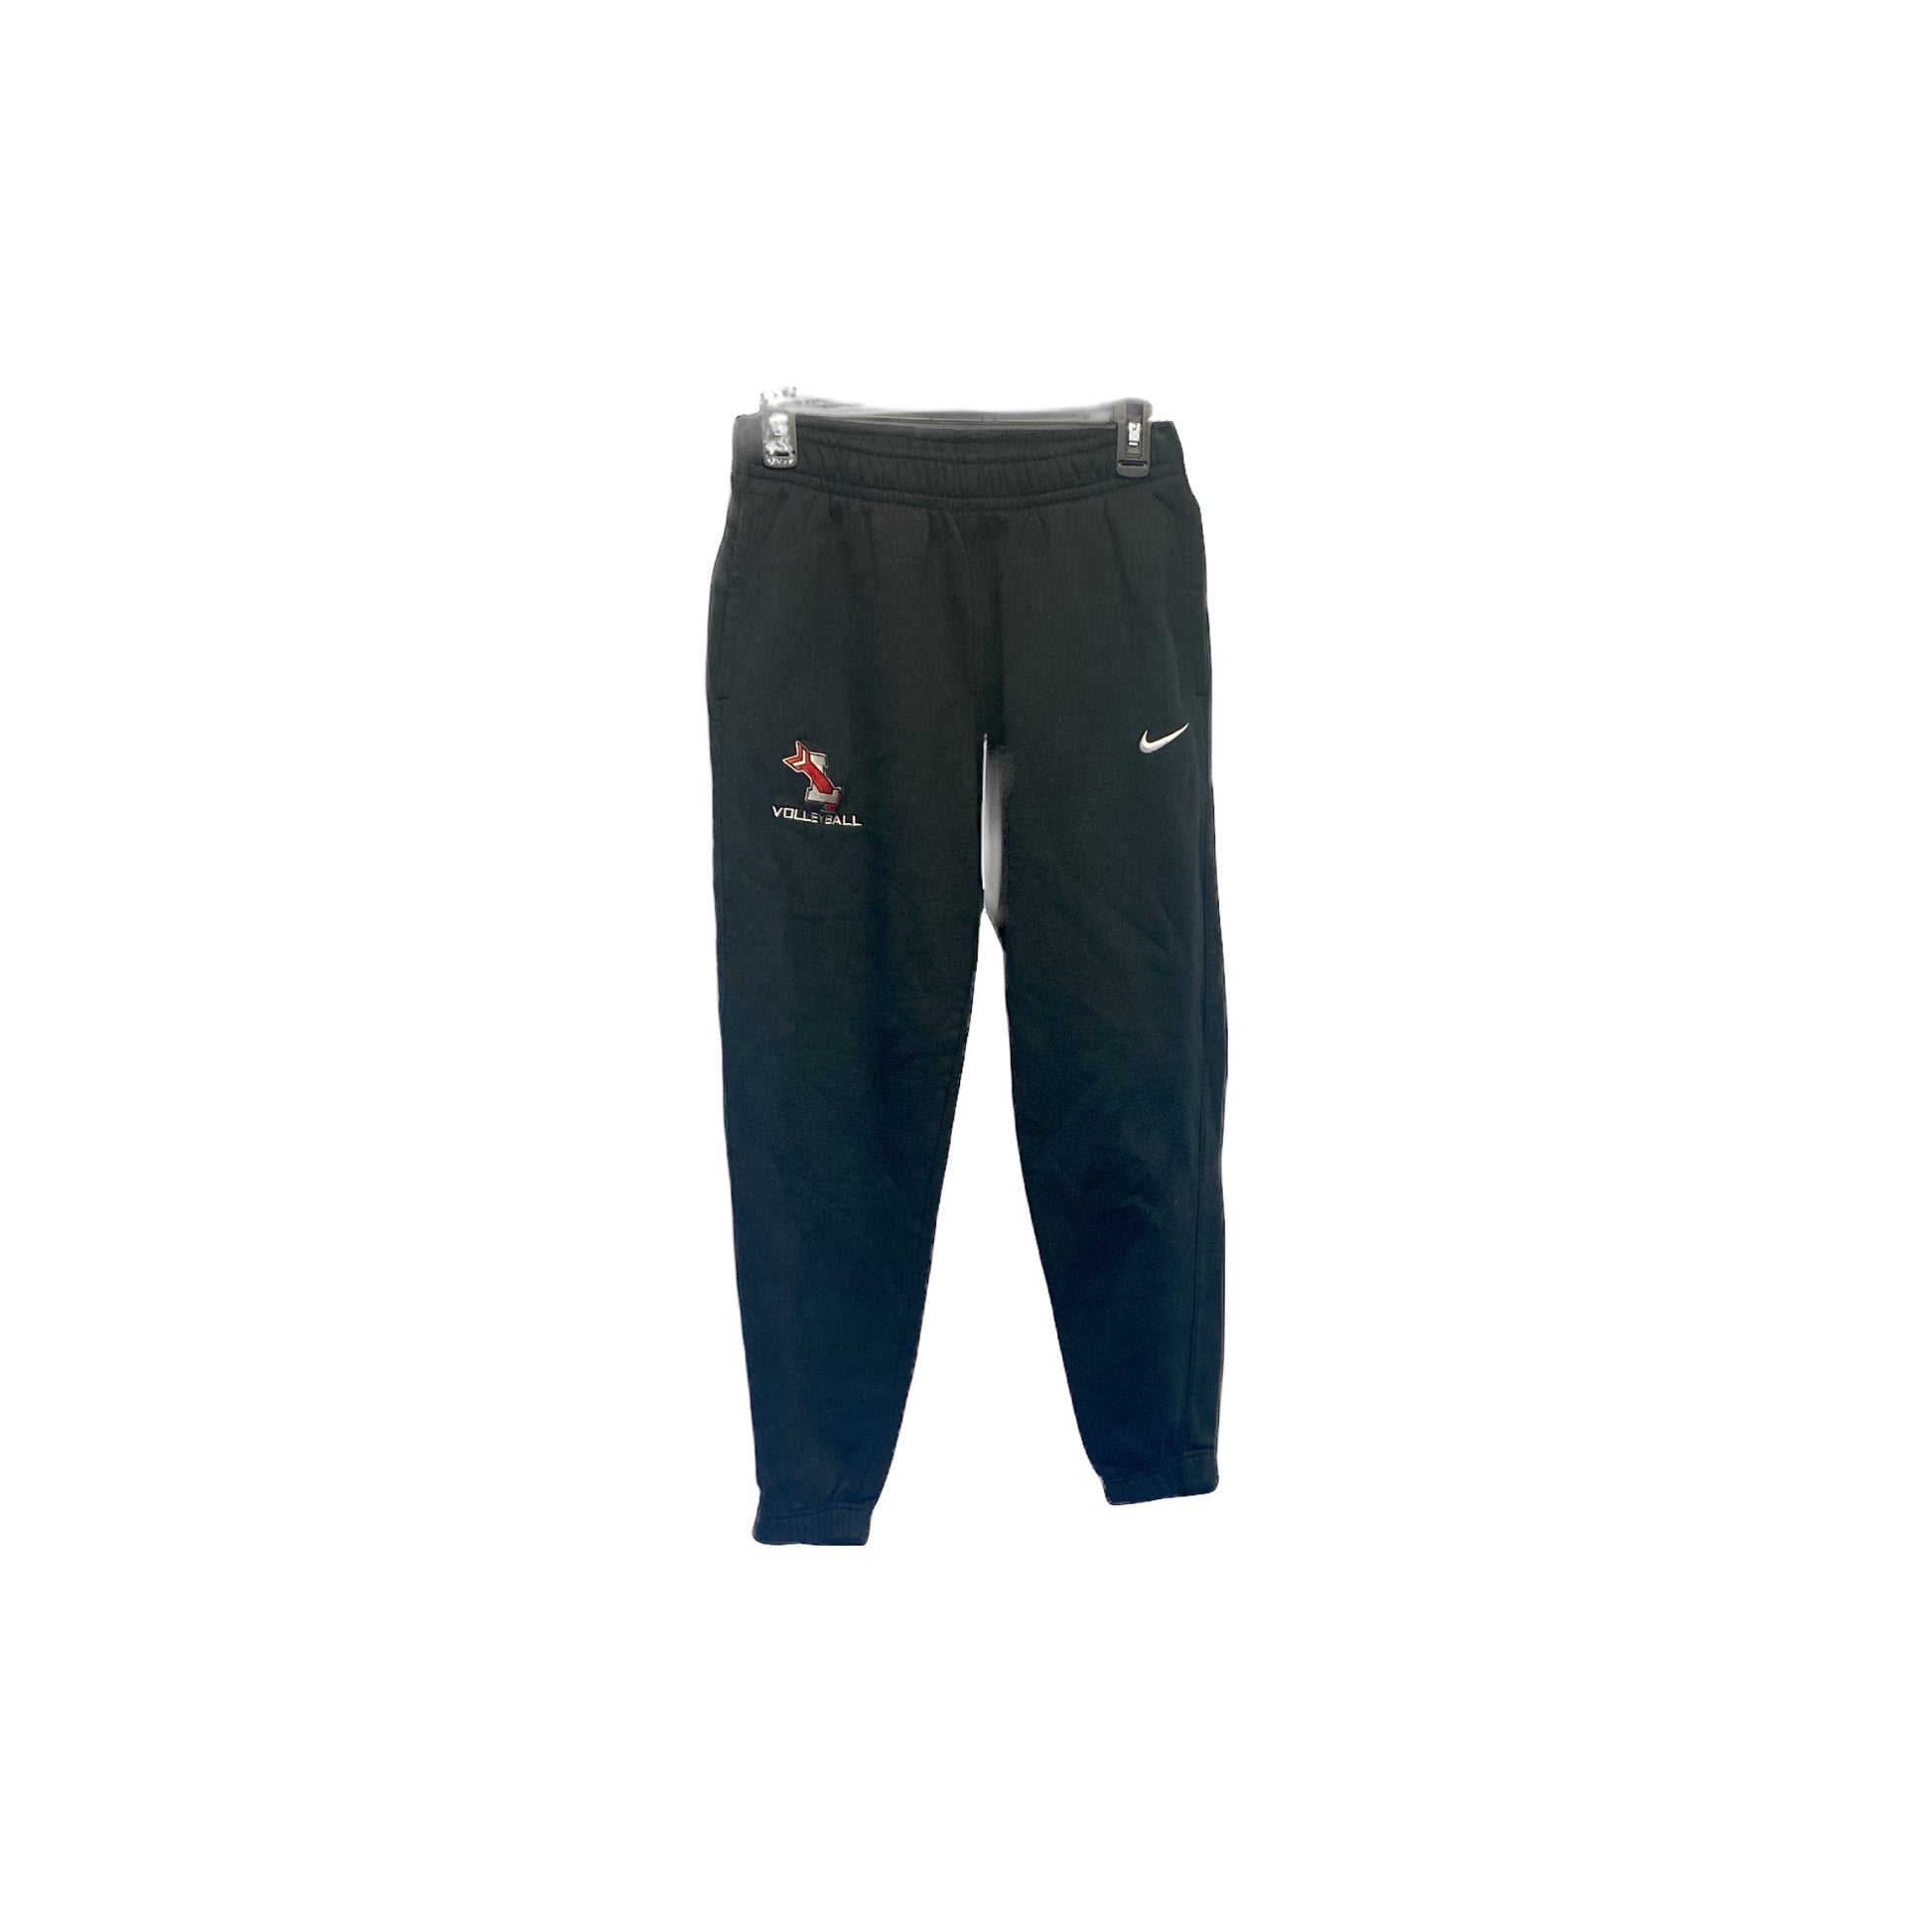 Lowell Volleyball Nike Warmup Pant - Adult Small